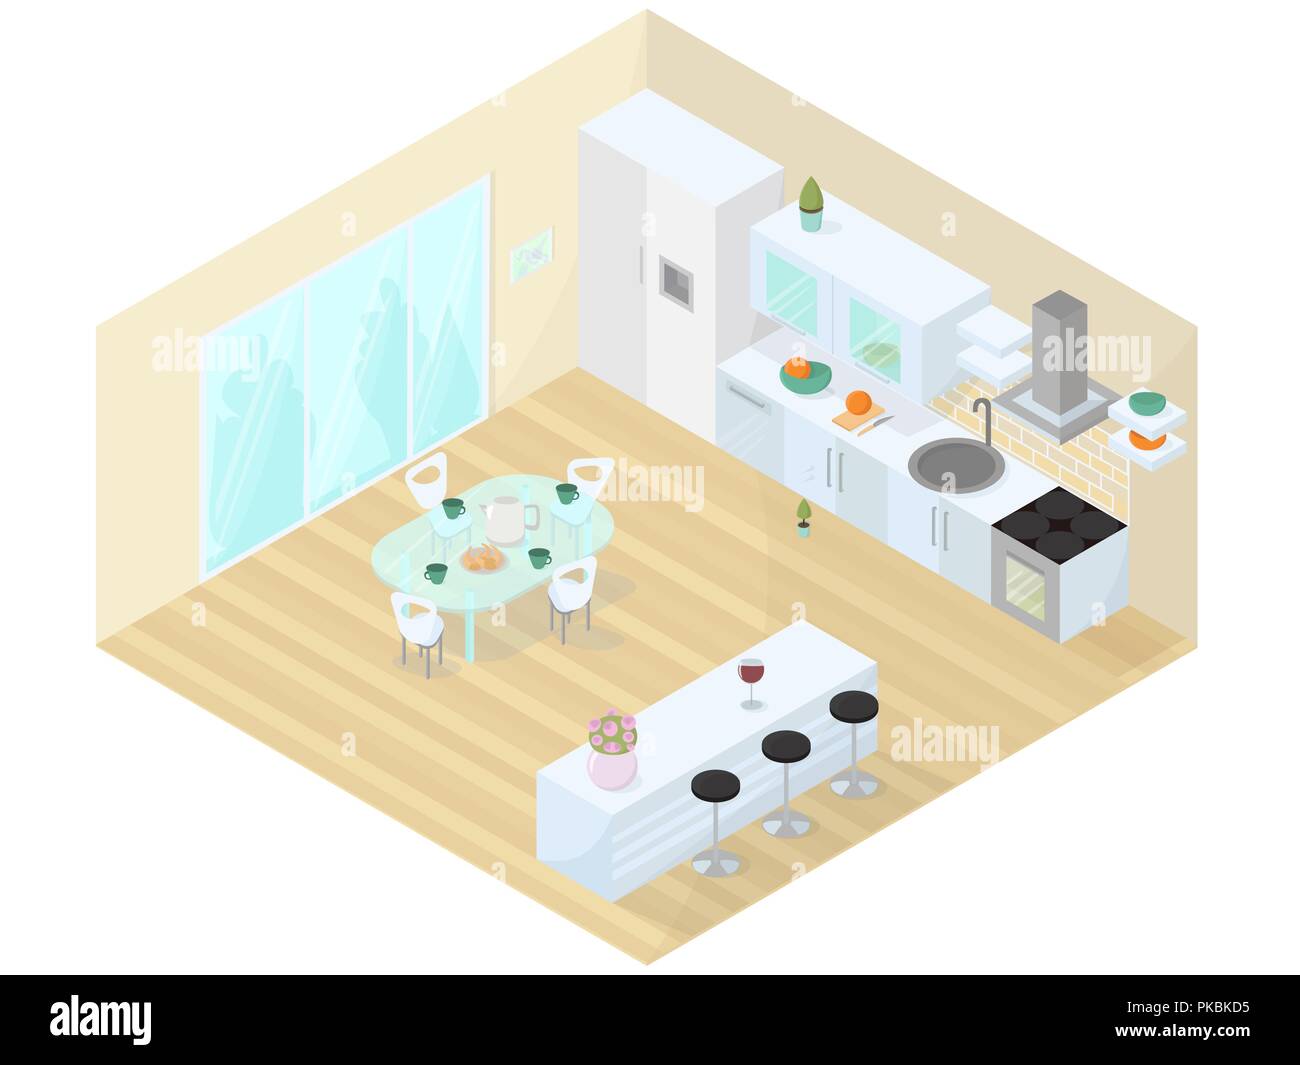 Kitchen dining room studio isometric vector illustration. Interior design with kitchen and dining furniture, stove, sink, exhaust fan. Stock Vector